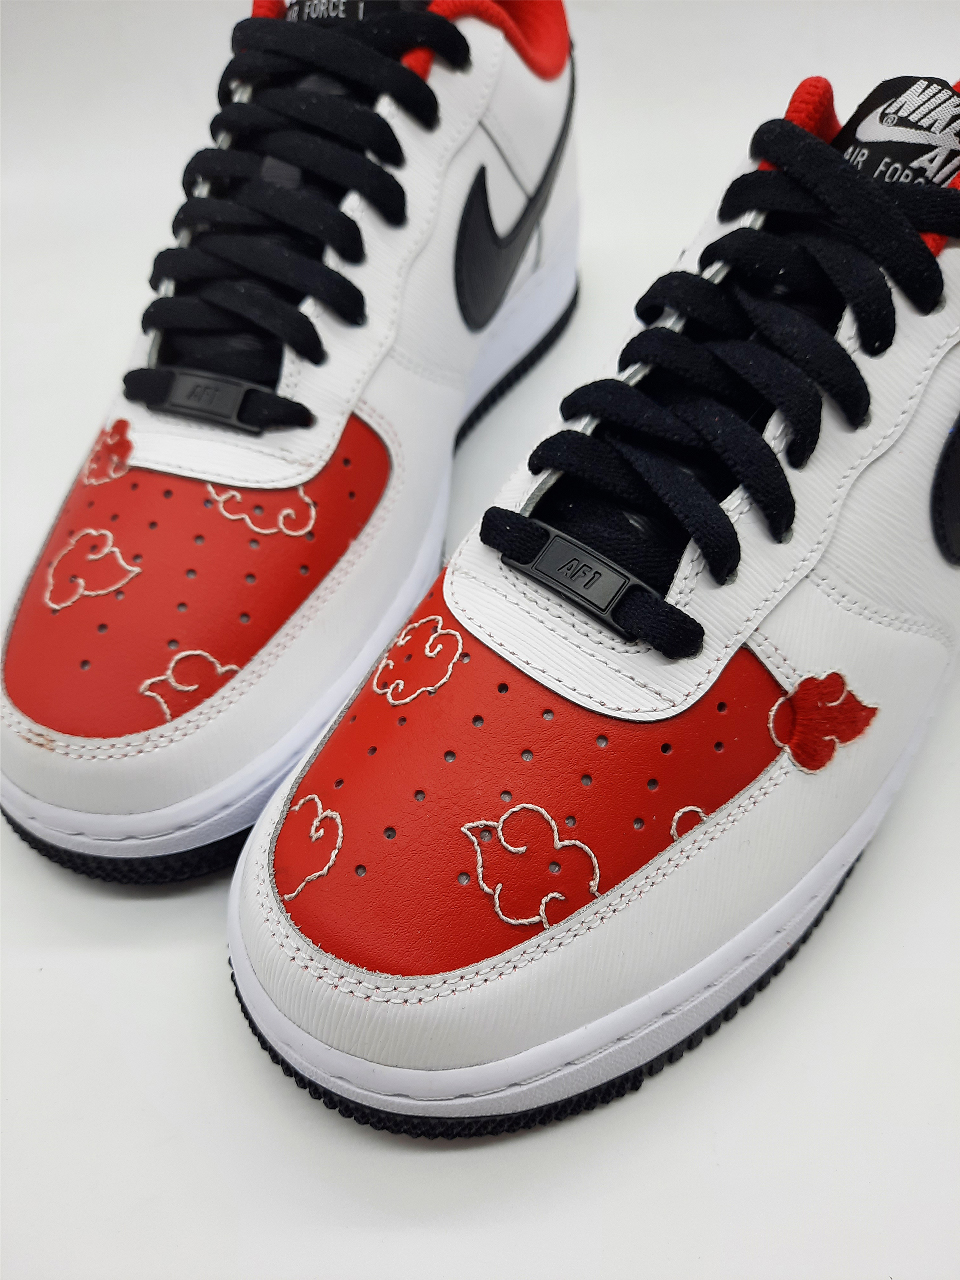 Broderie Naruto sur sneakers Nike Air Force 1 blanches et rouges